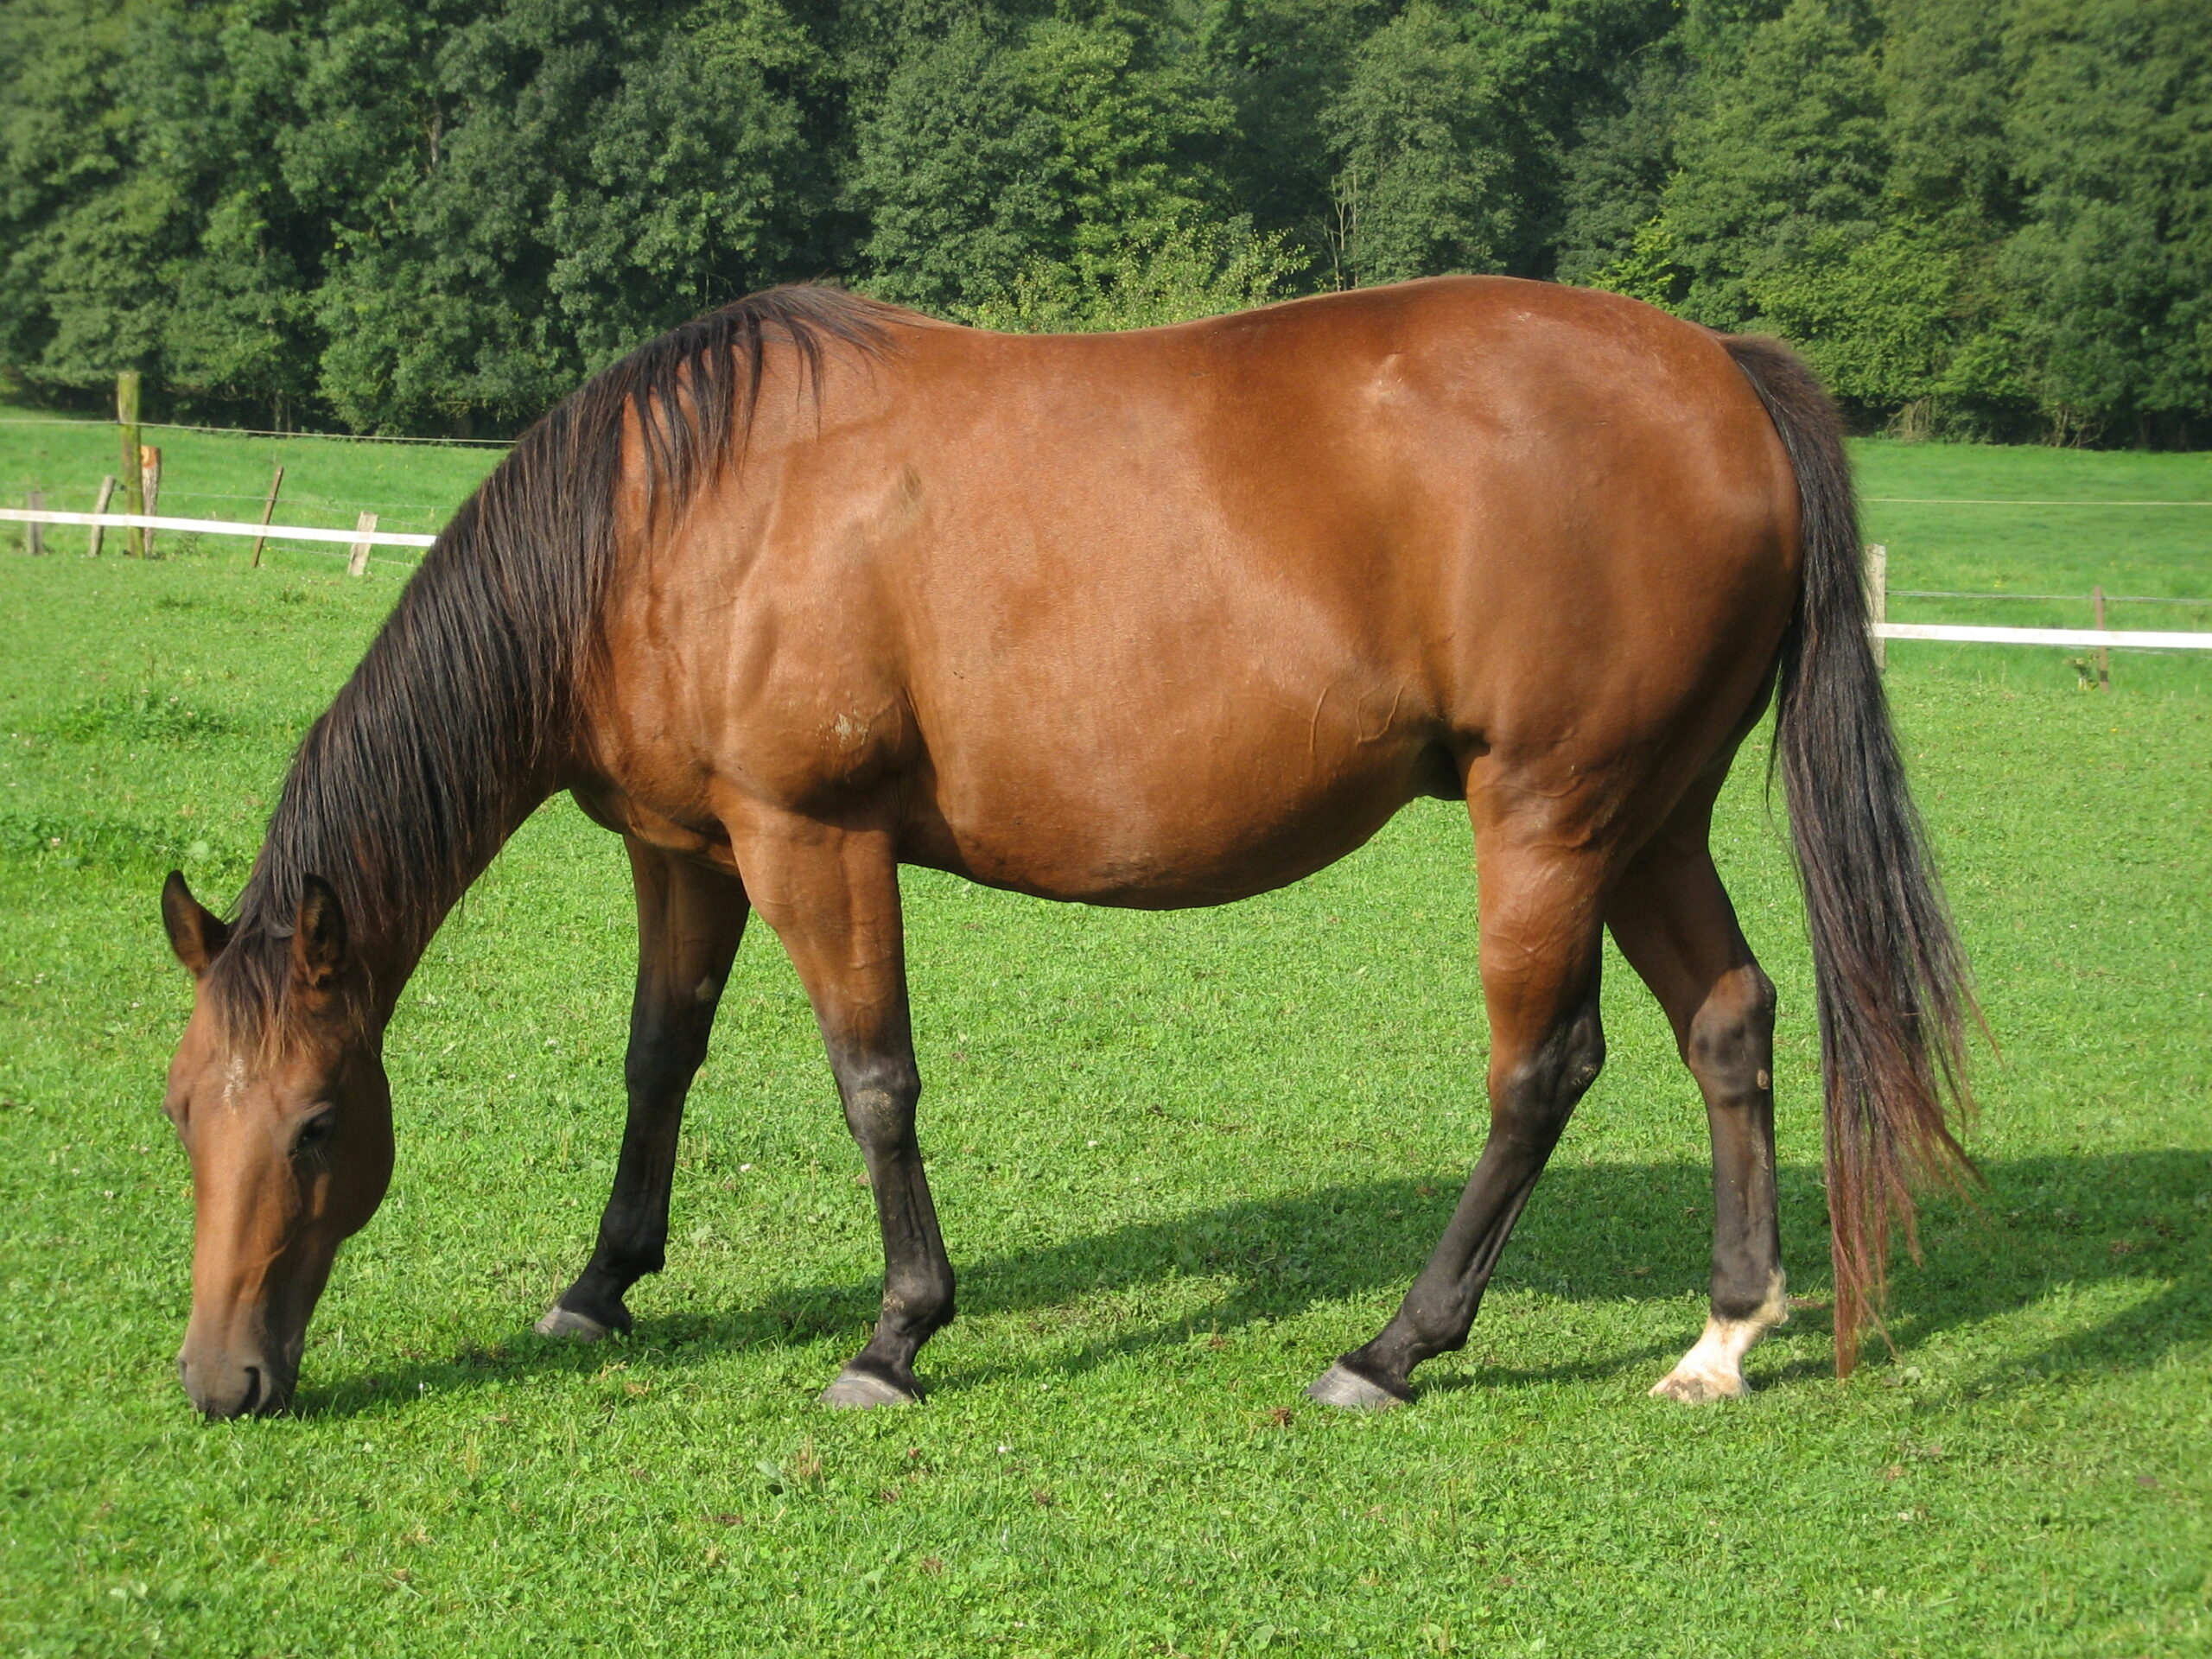 American Quarter Horse Most Expensive Horse breed